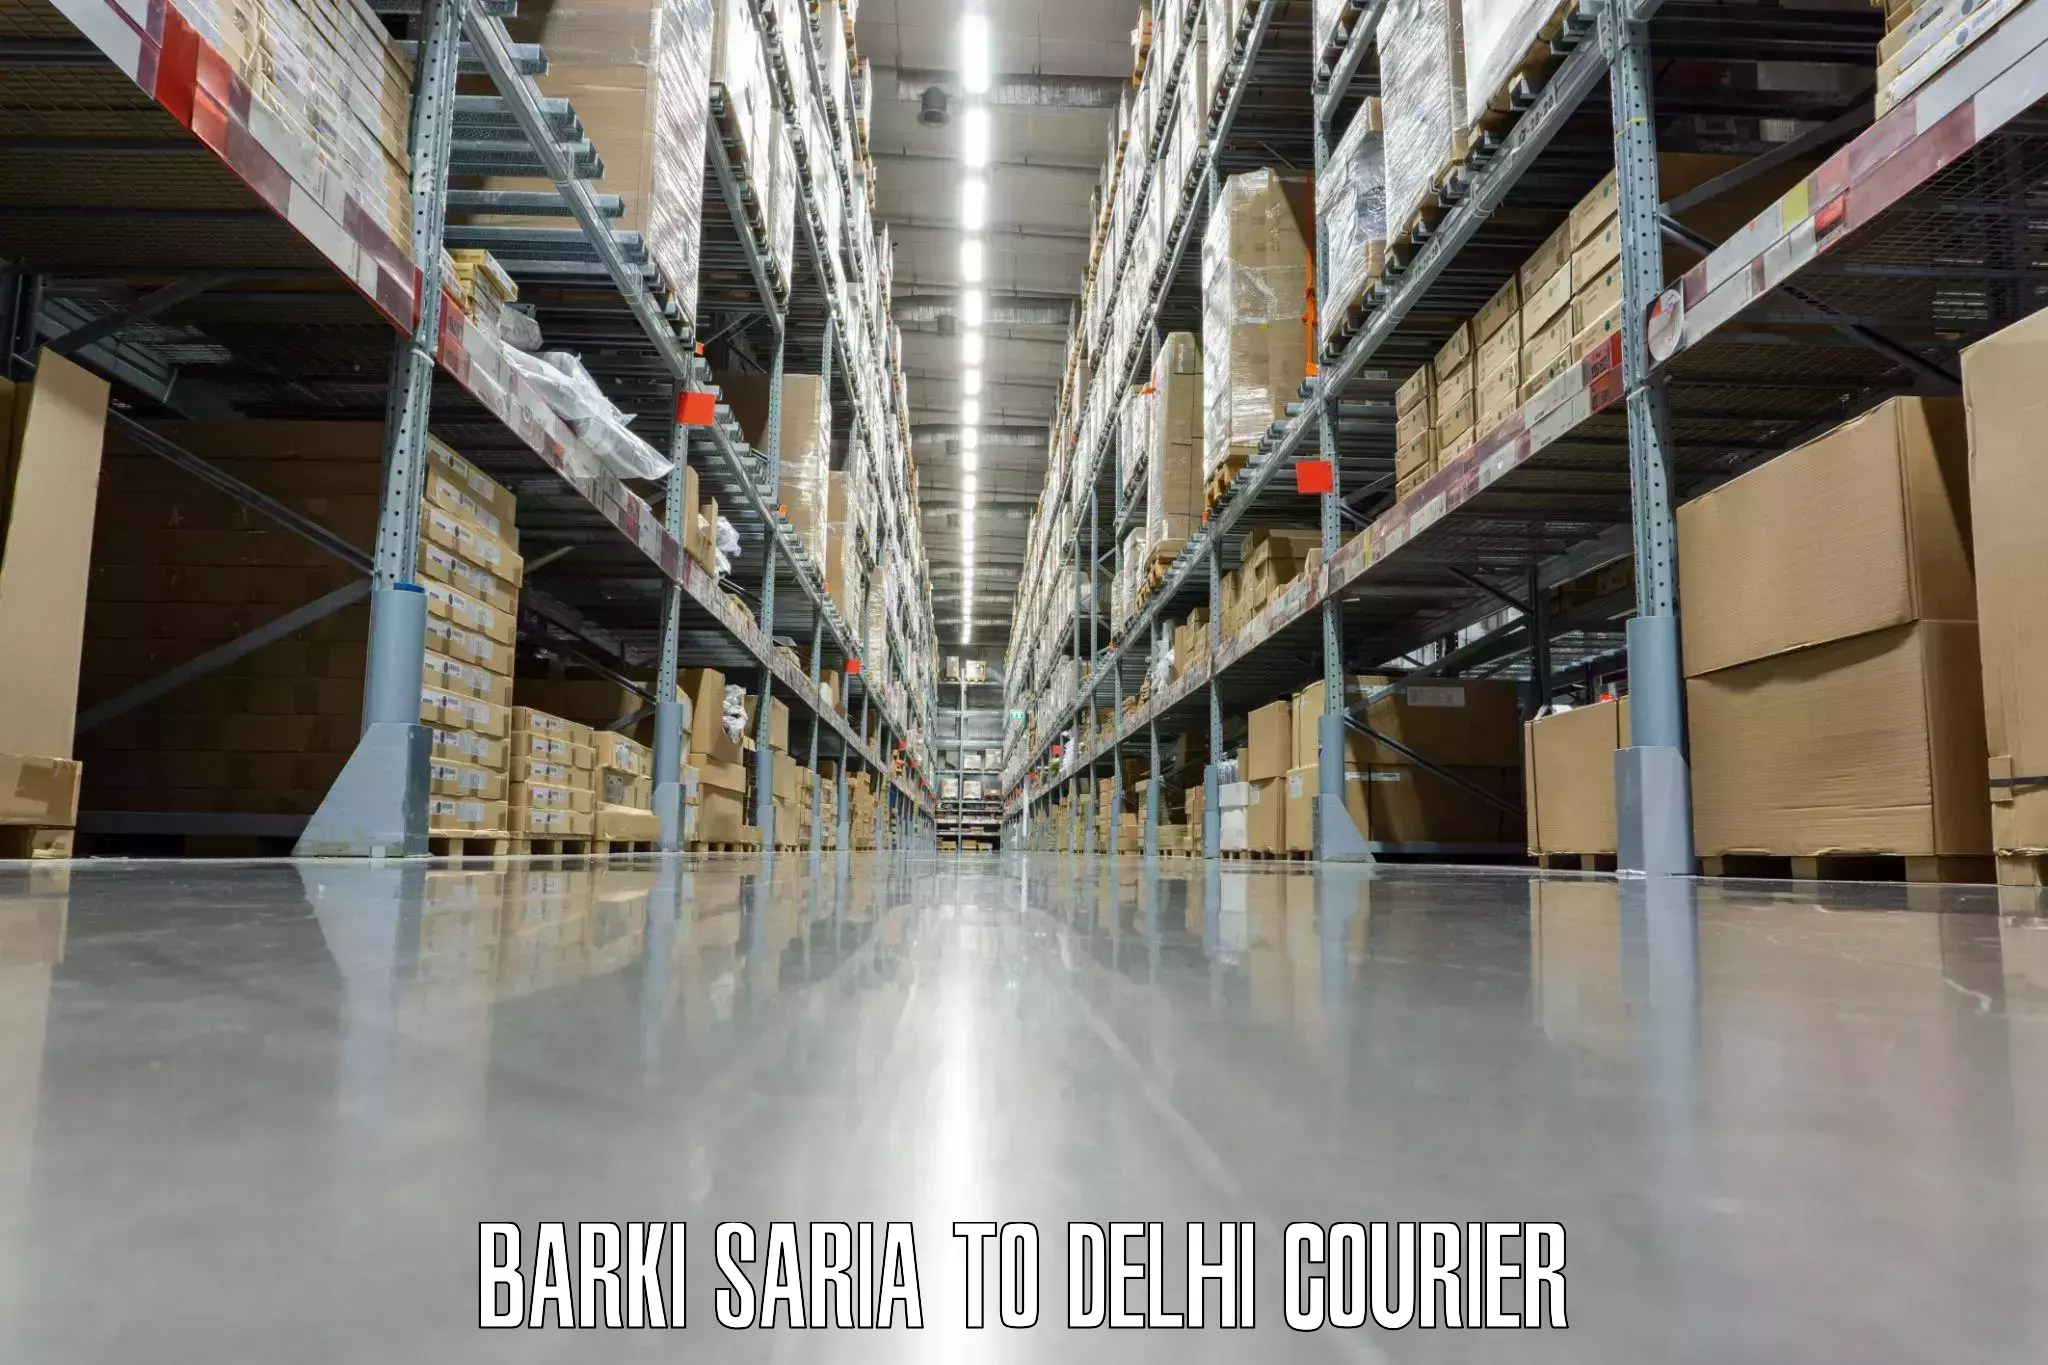 Personal effects shipping Barki Saria to Delhi Technological University DTU